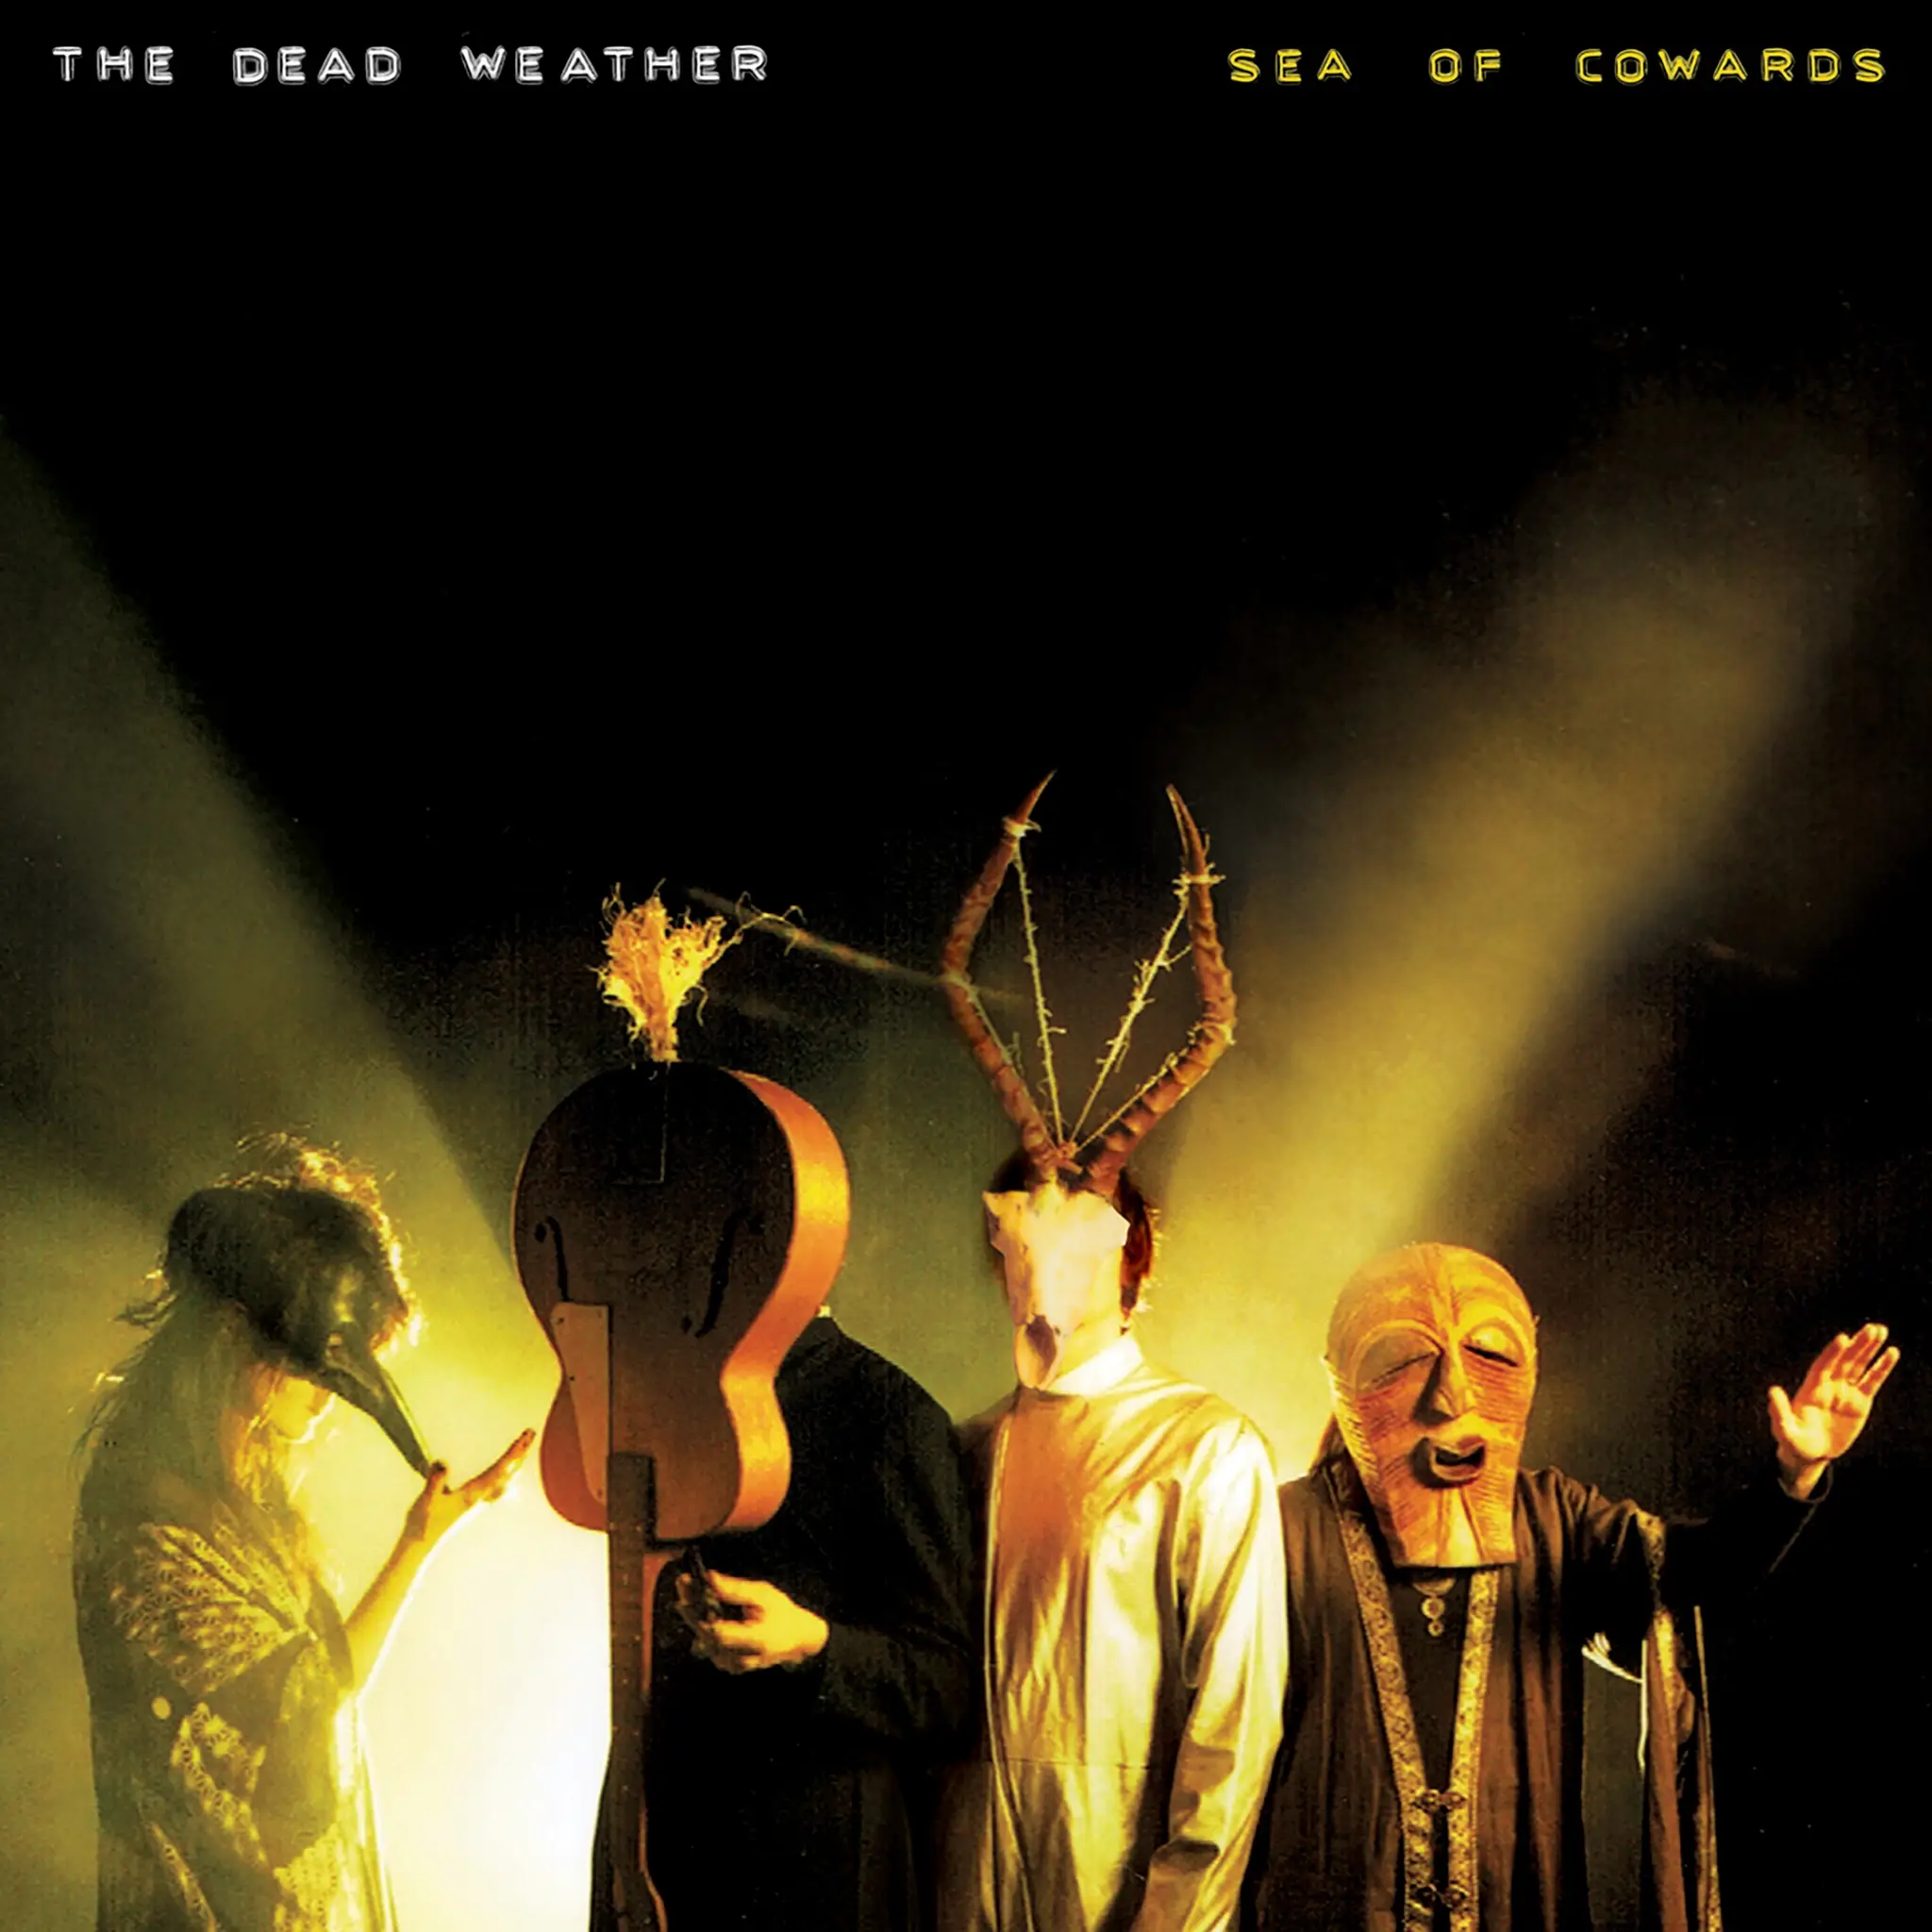 <strong>The Dead Weather - Sea Of Cowards</strong> (Vinyl LP - black)